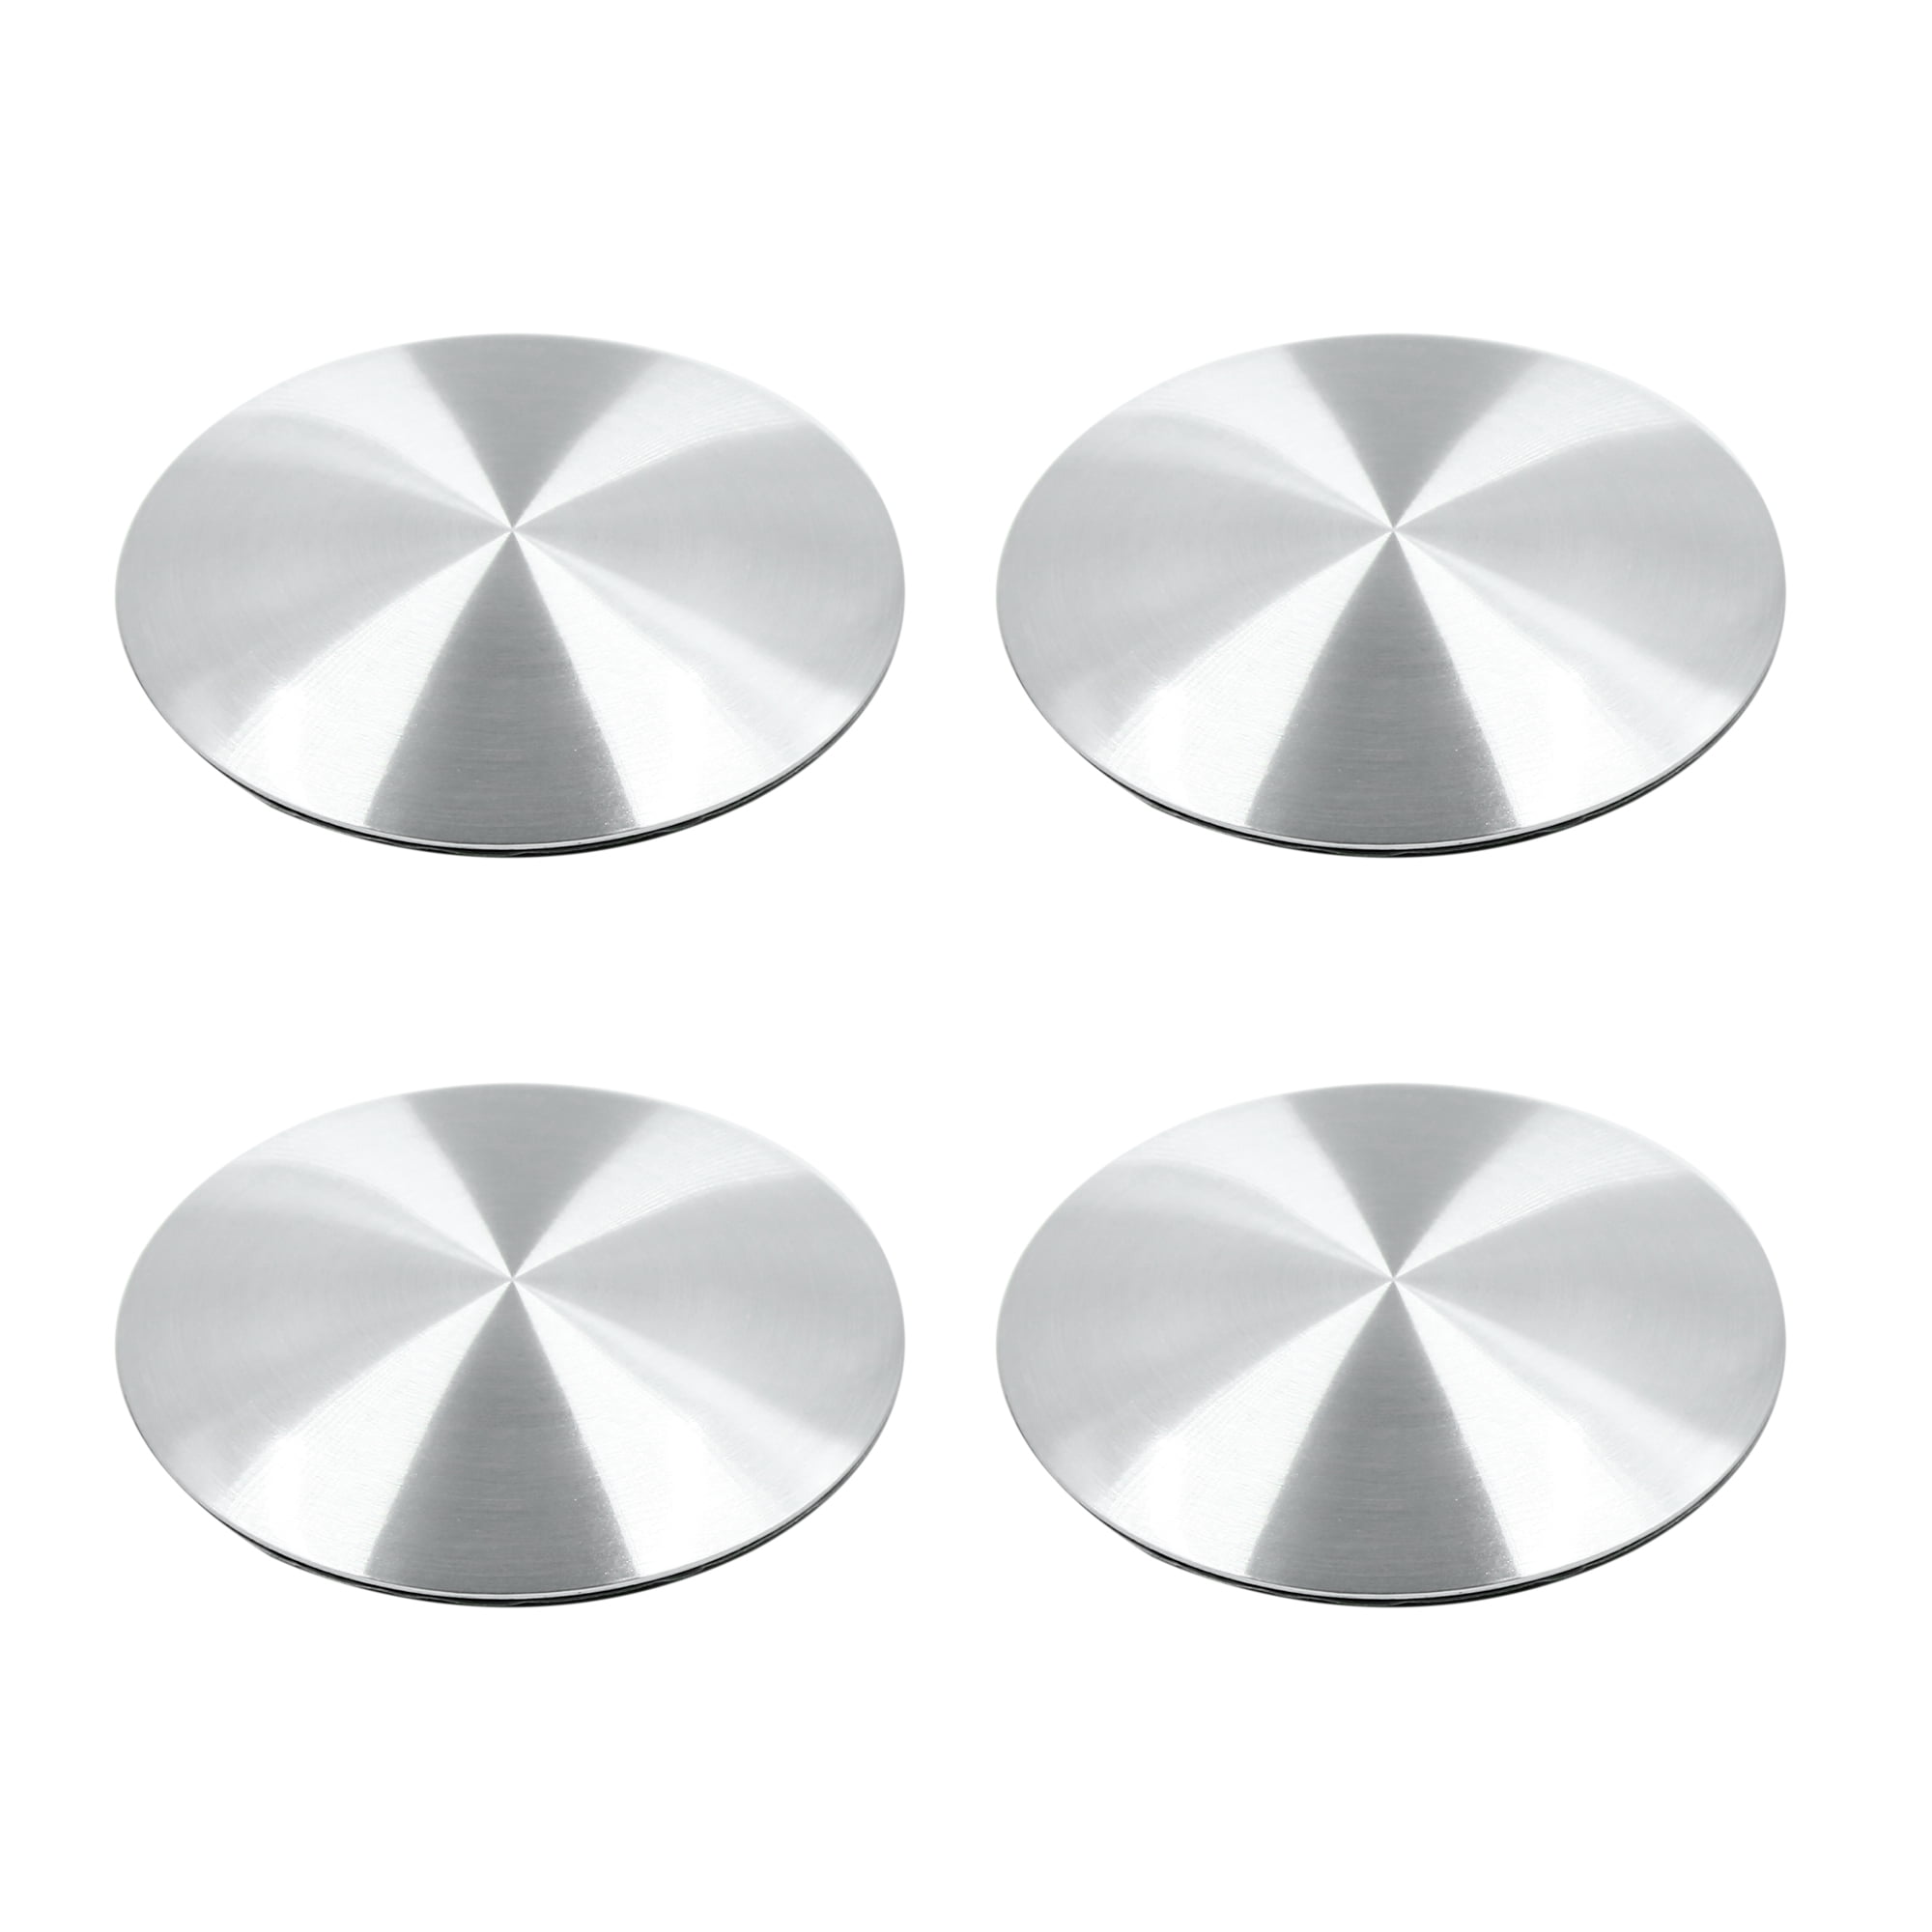 4x 60mm For Cadillac Car Wheel Rim Center Covers Hub Caps Emblems Badges Styling